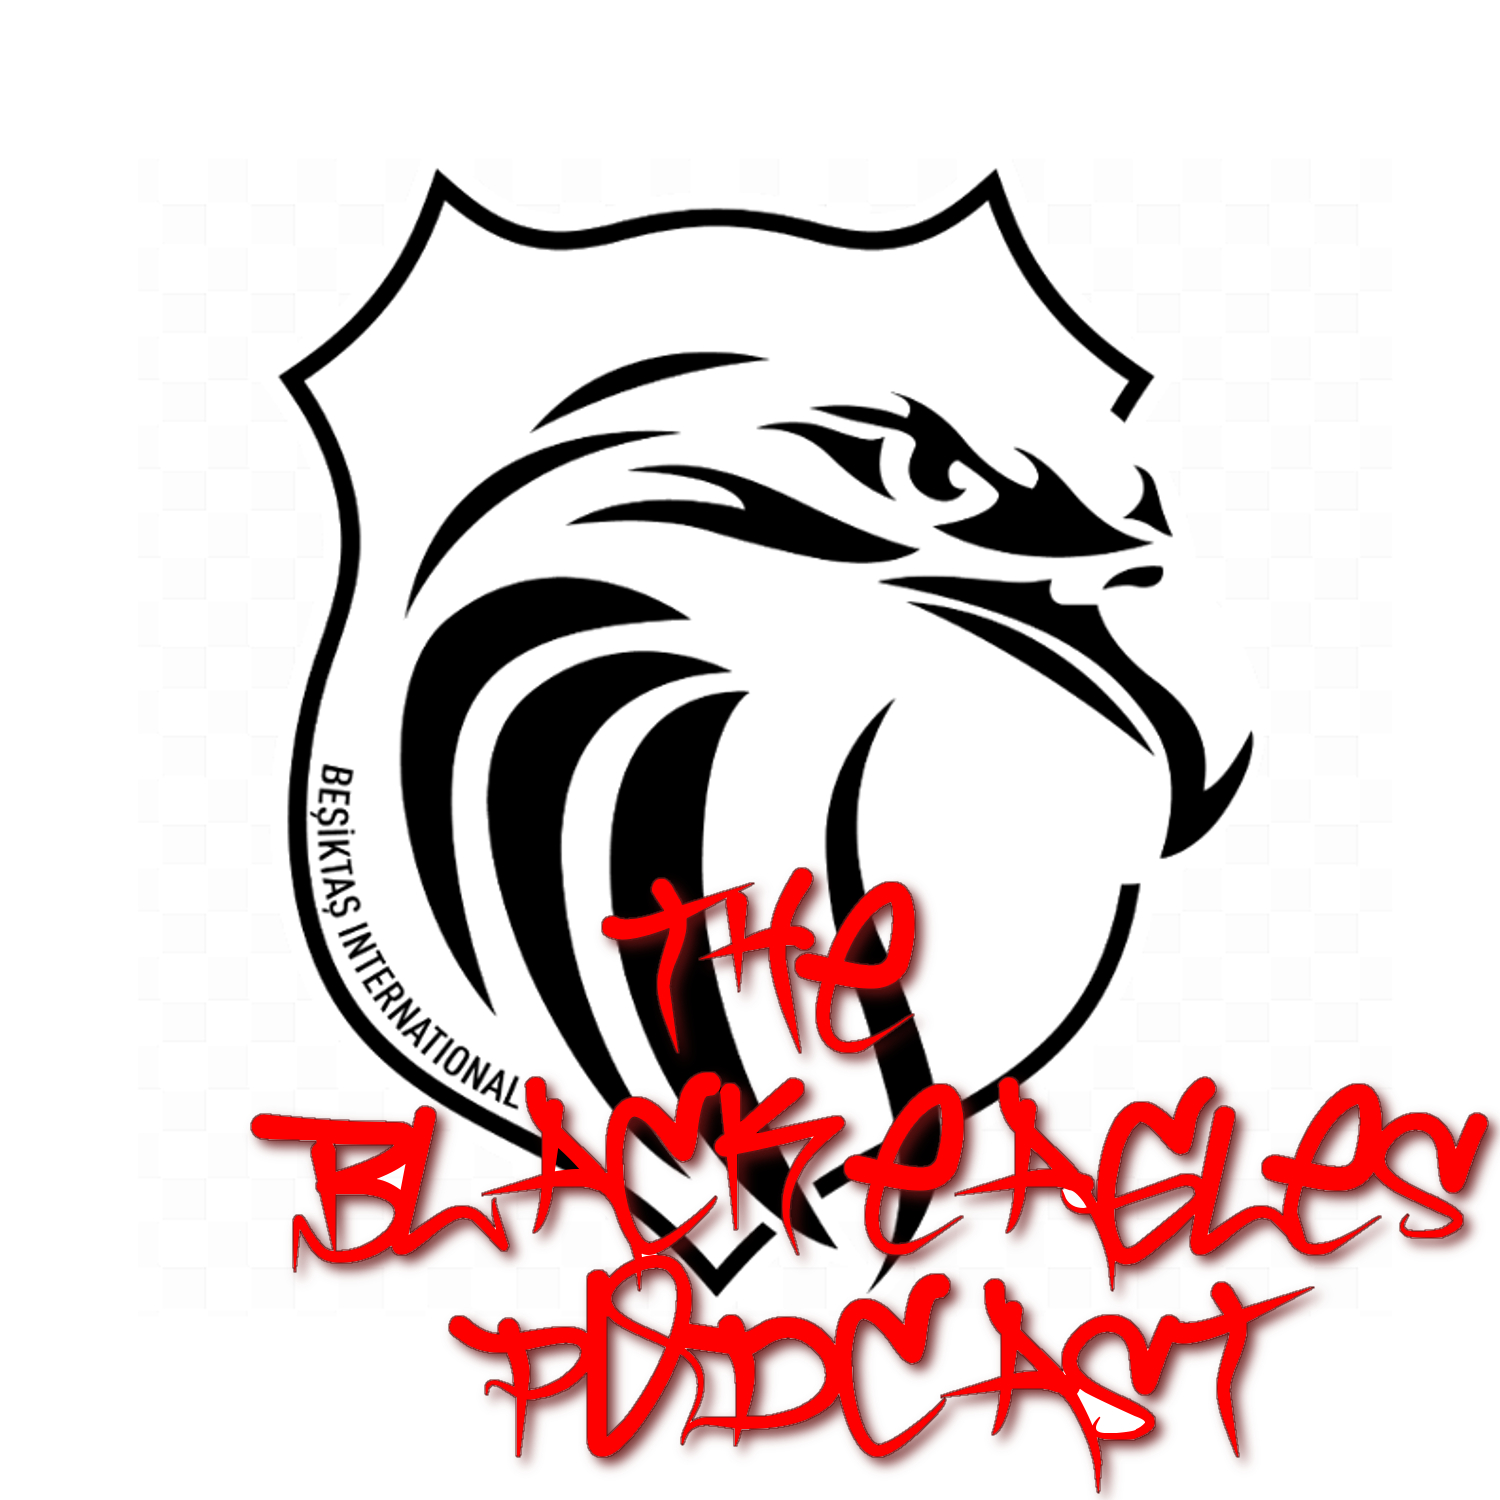 The Black Eagles Podcast - Episode 3 - May 30th, 2018 - More Transfer News (Manuel Fernandes, Daniel Opare, and much, much more)